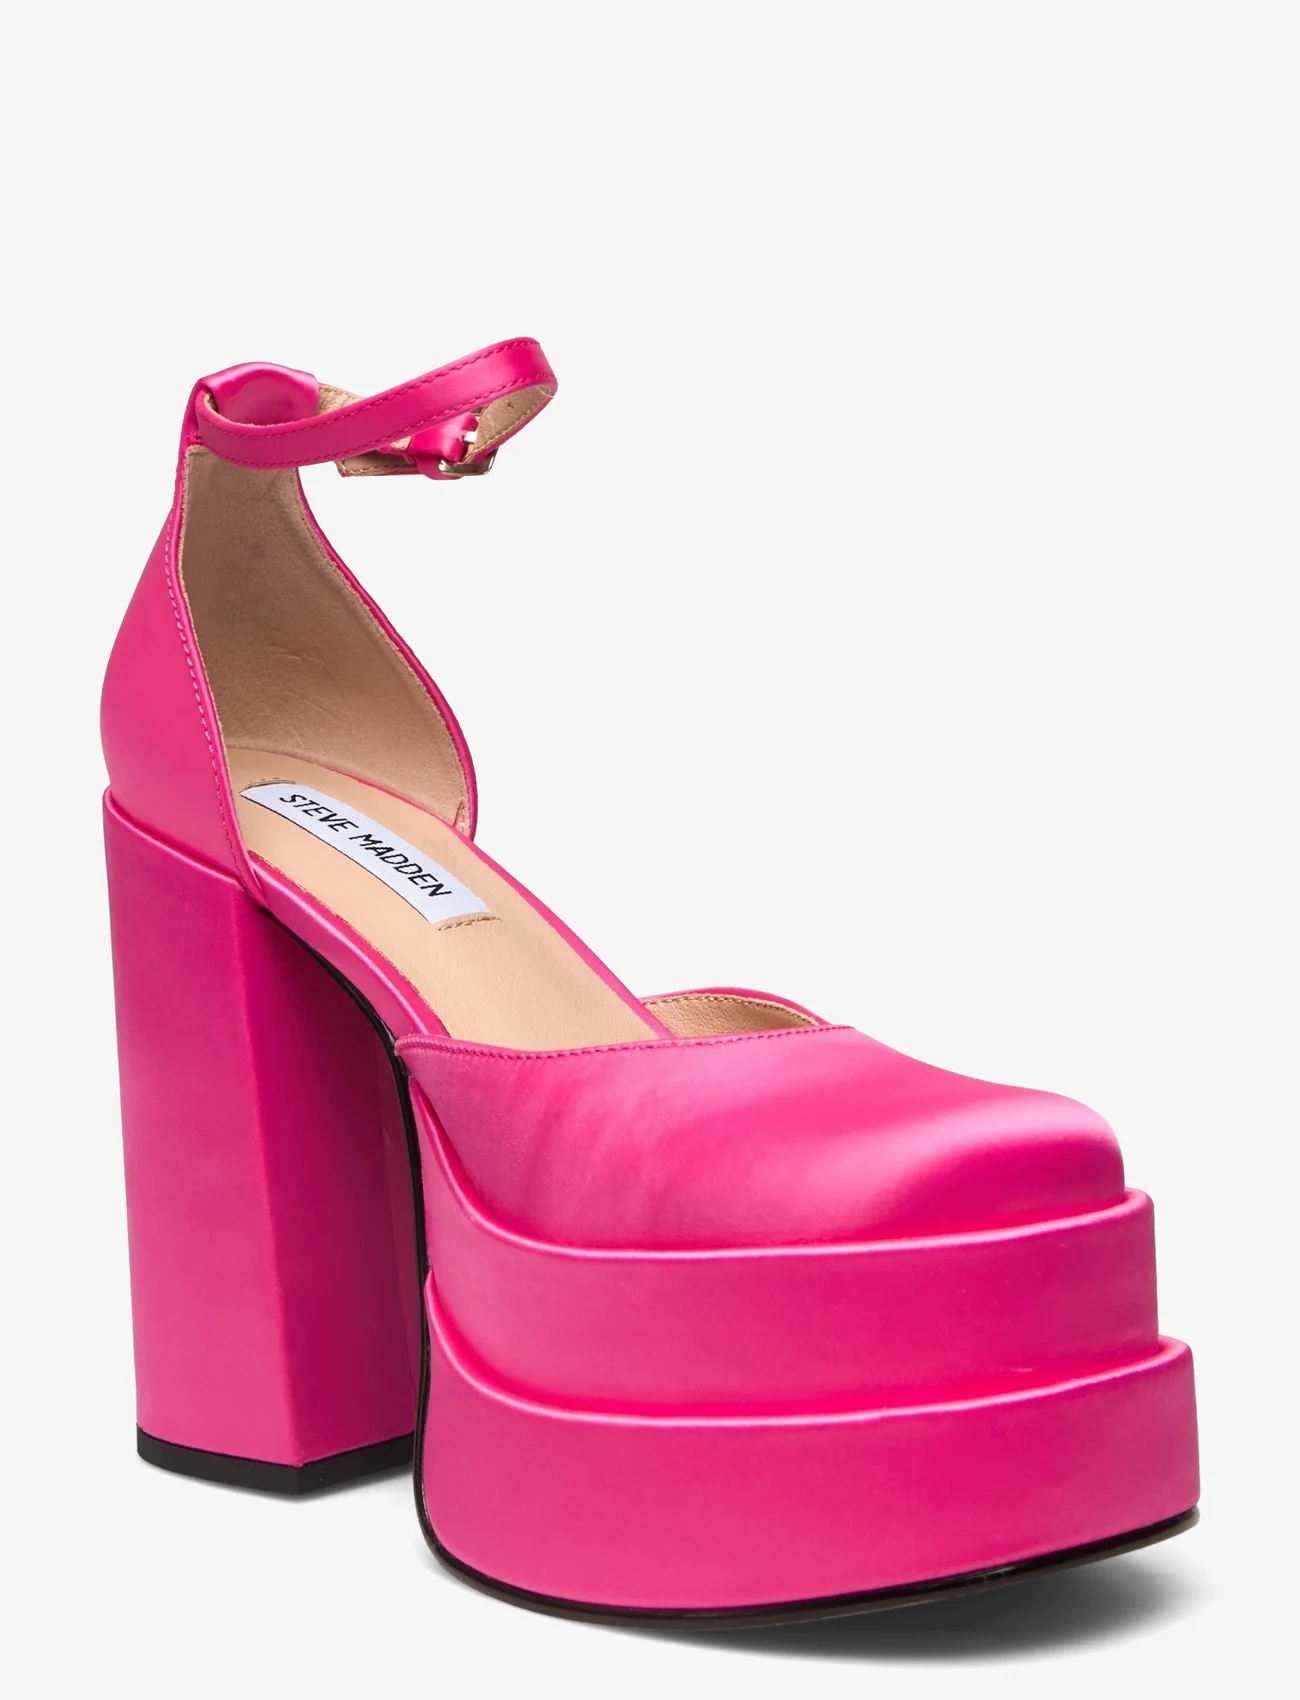 Steve Madden - Charlize Sandal - party wear at outlet prices - pink satin - 0